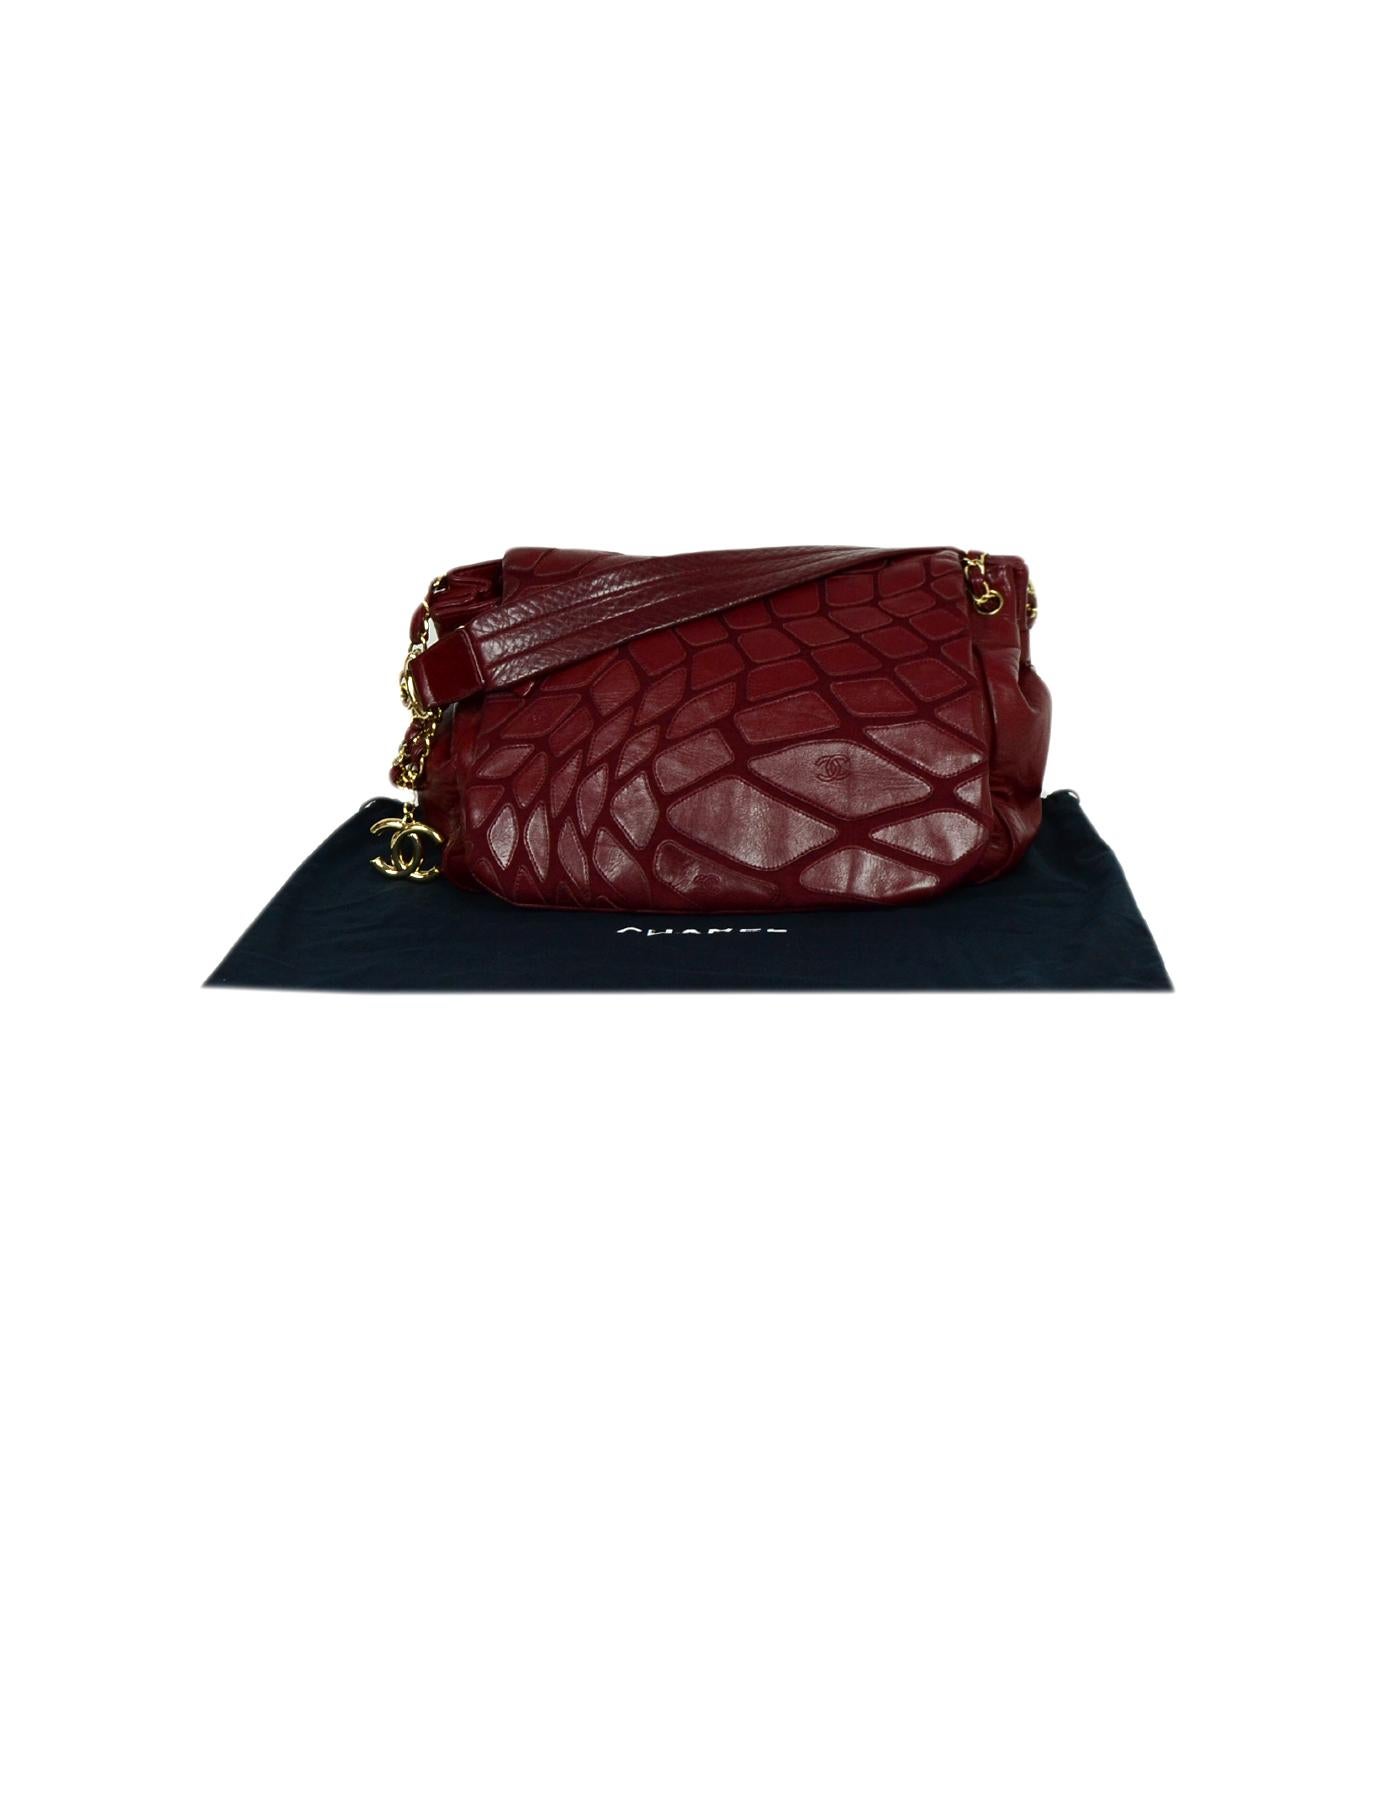 Chanel Burgundy Leather Patchwork Scales Accordion Flap Bag 5